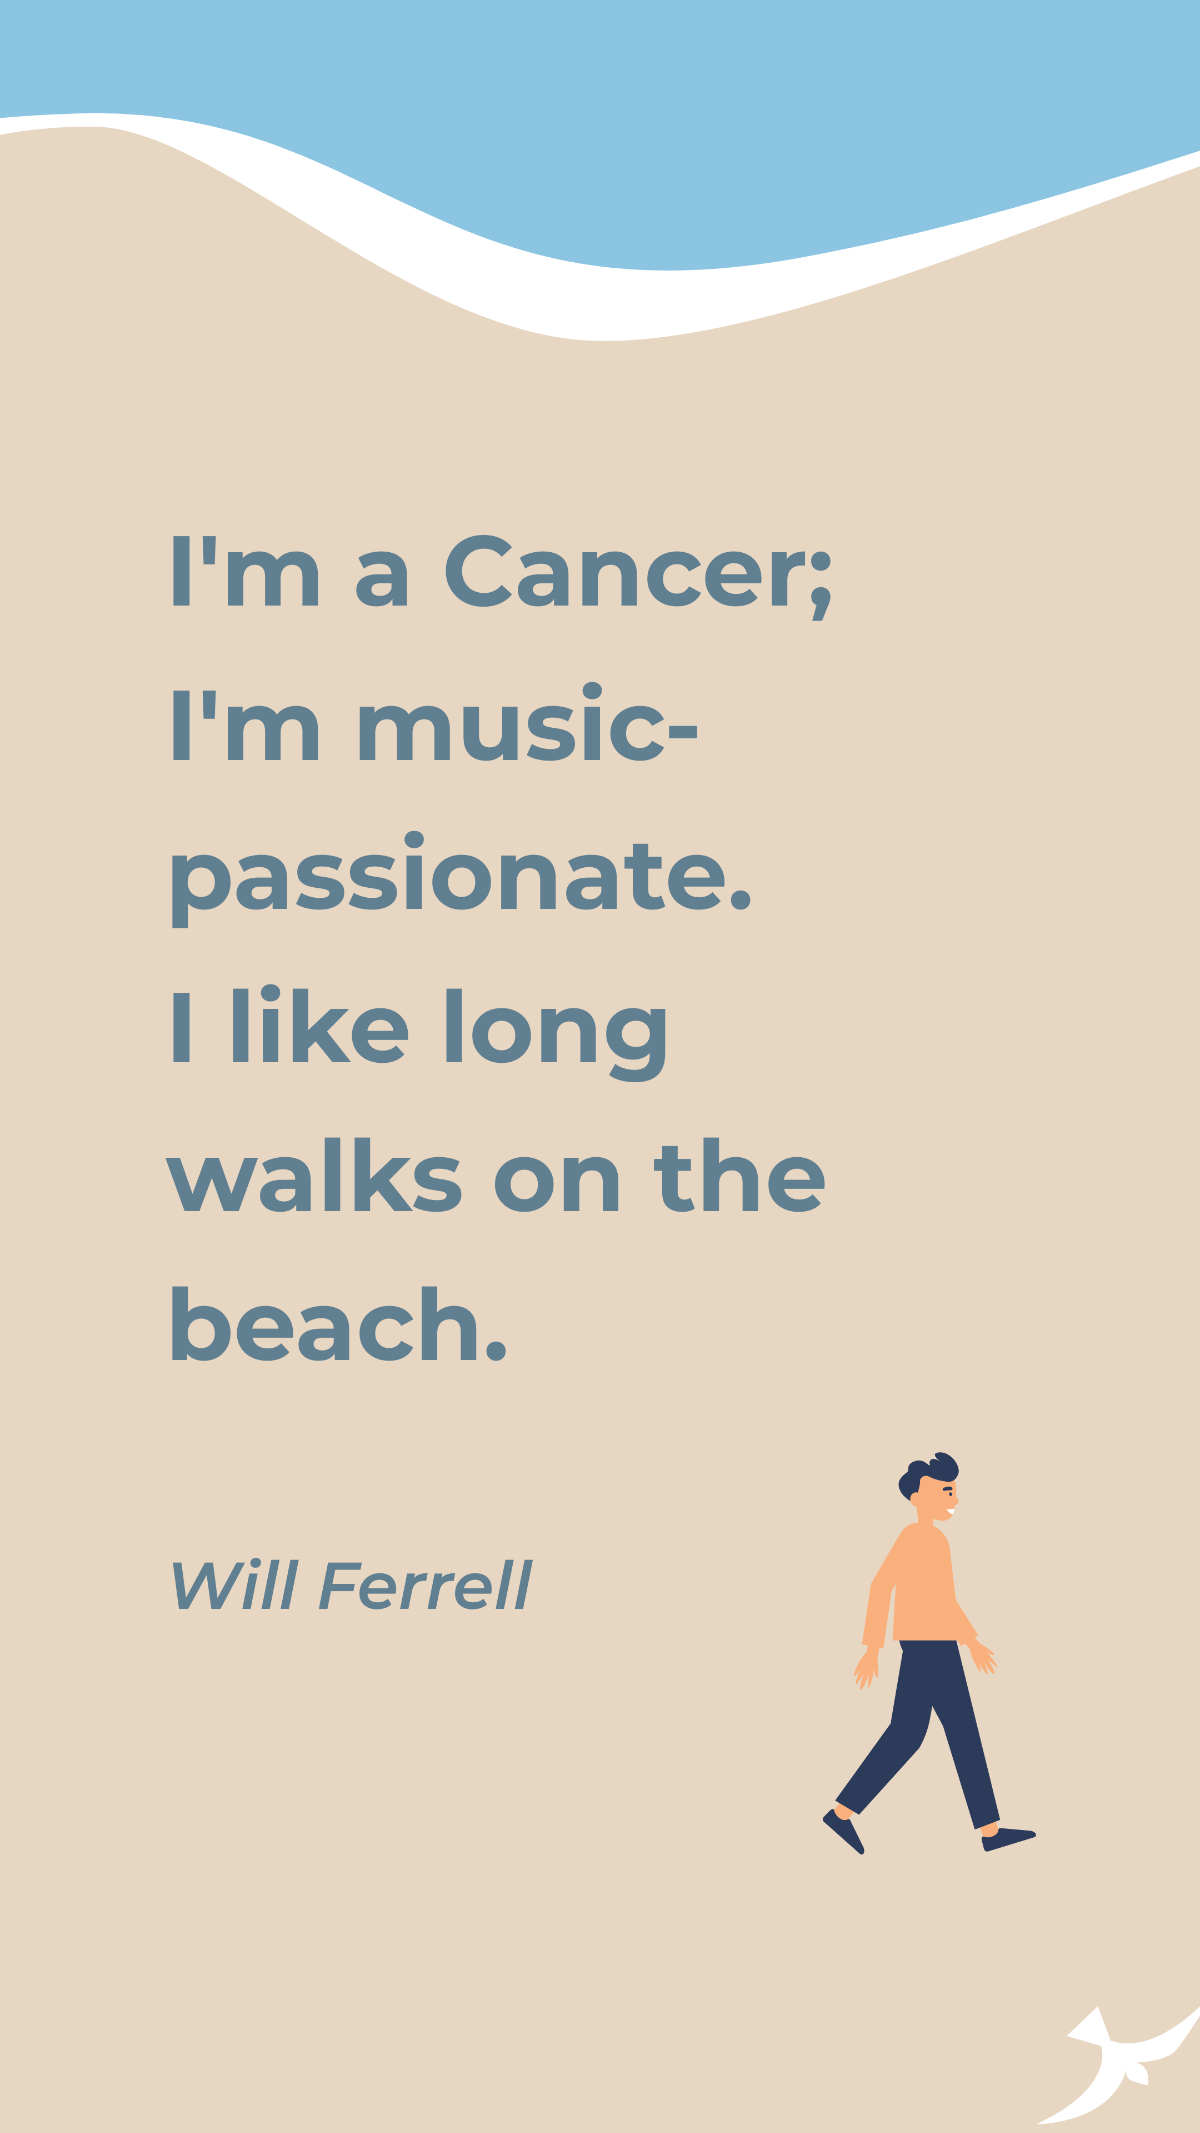 Will Ferrell - I'm a Cancer; I'm music-passionate. I like long walks on the beach.